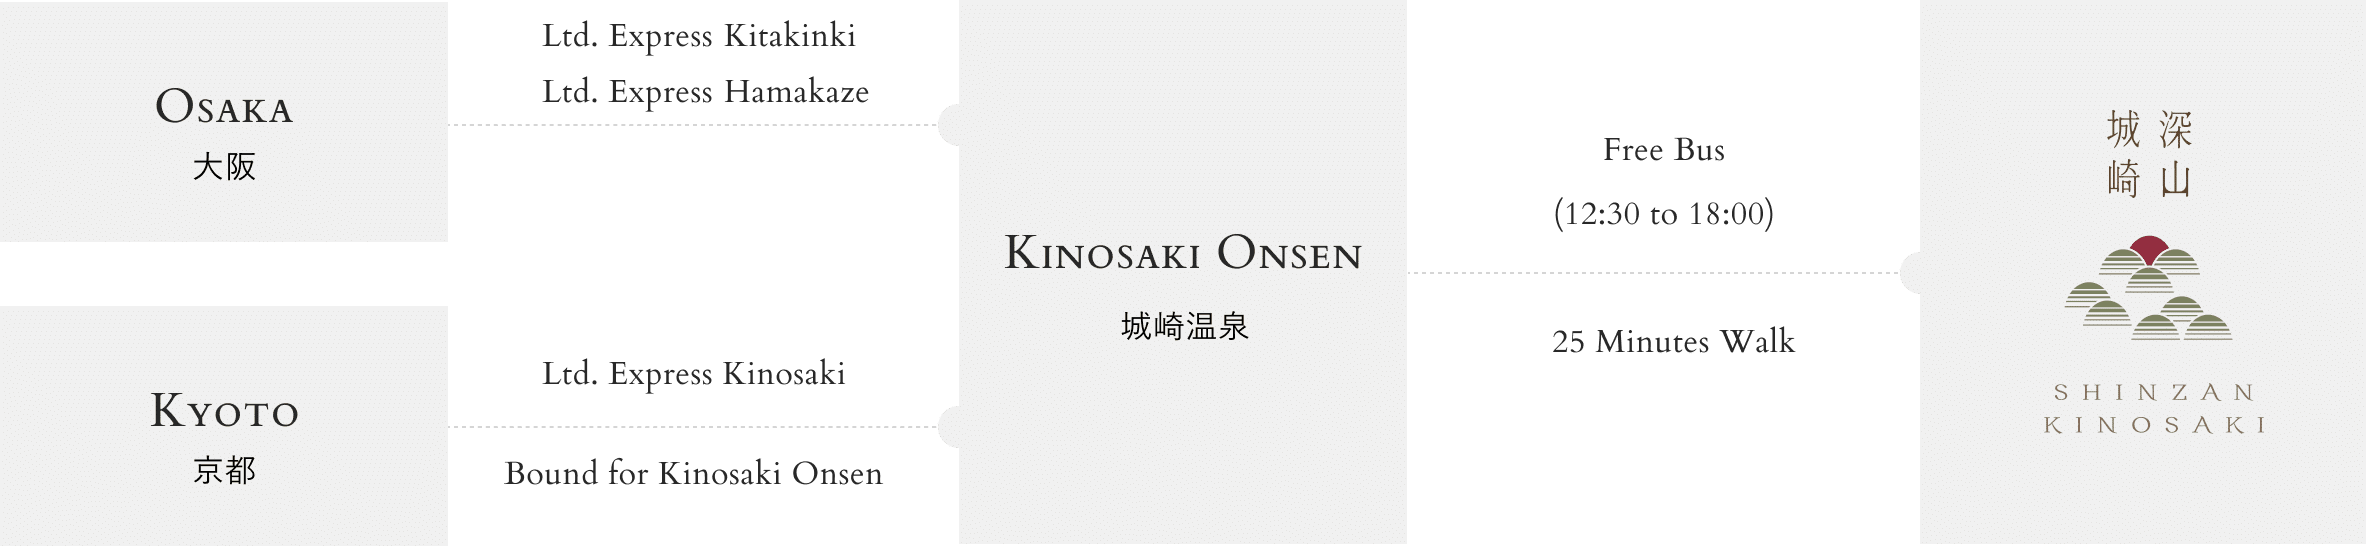 If you are traveling from Osaka, you can reach Kinosaki Onsen Station by taking the JR Limited Express 'Kitakinki' or 'Hamakaze'. From there, you can come to Miyama either by a complimentary check-in bus available from 1 PM to 6 PM or by a walk of approximately 25 minutes. If you are coming from Kyoto, take the JR Limited Express 'Kinosaki No.11' bound for Fukuchiyama to reach Kinosaki Onsen Station. From the station, you have the same options to reach Miyama: a complimentary check-in bus available from 1 PM to 6 PM or a walk of about 25 minutes.